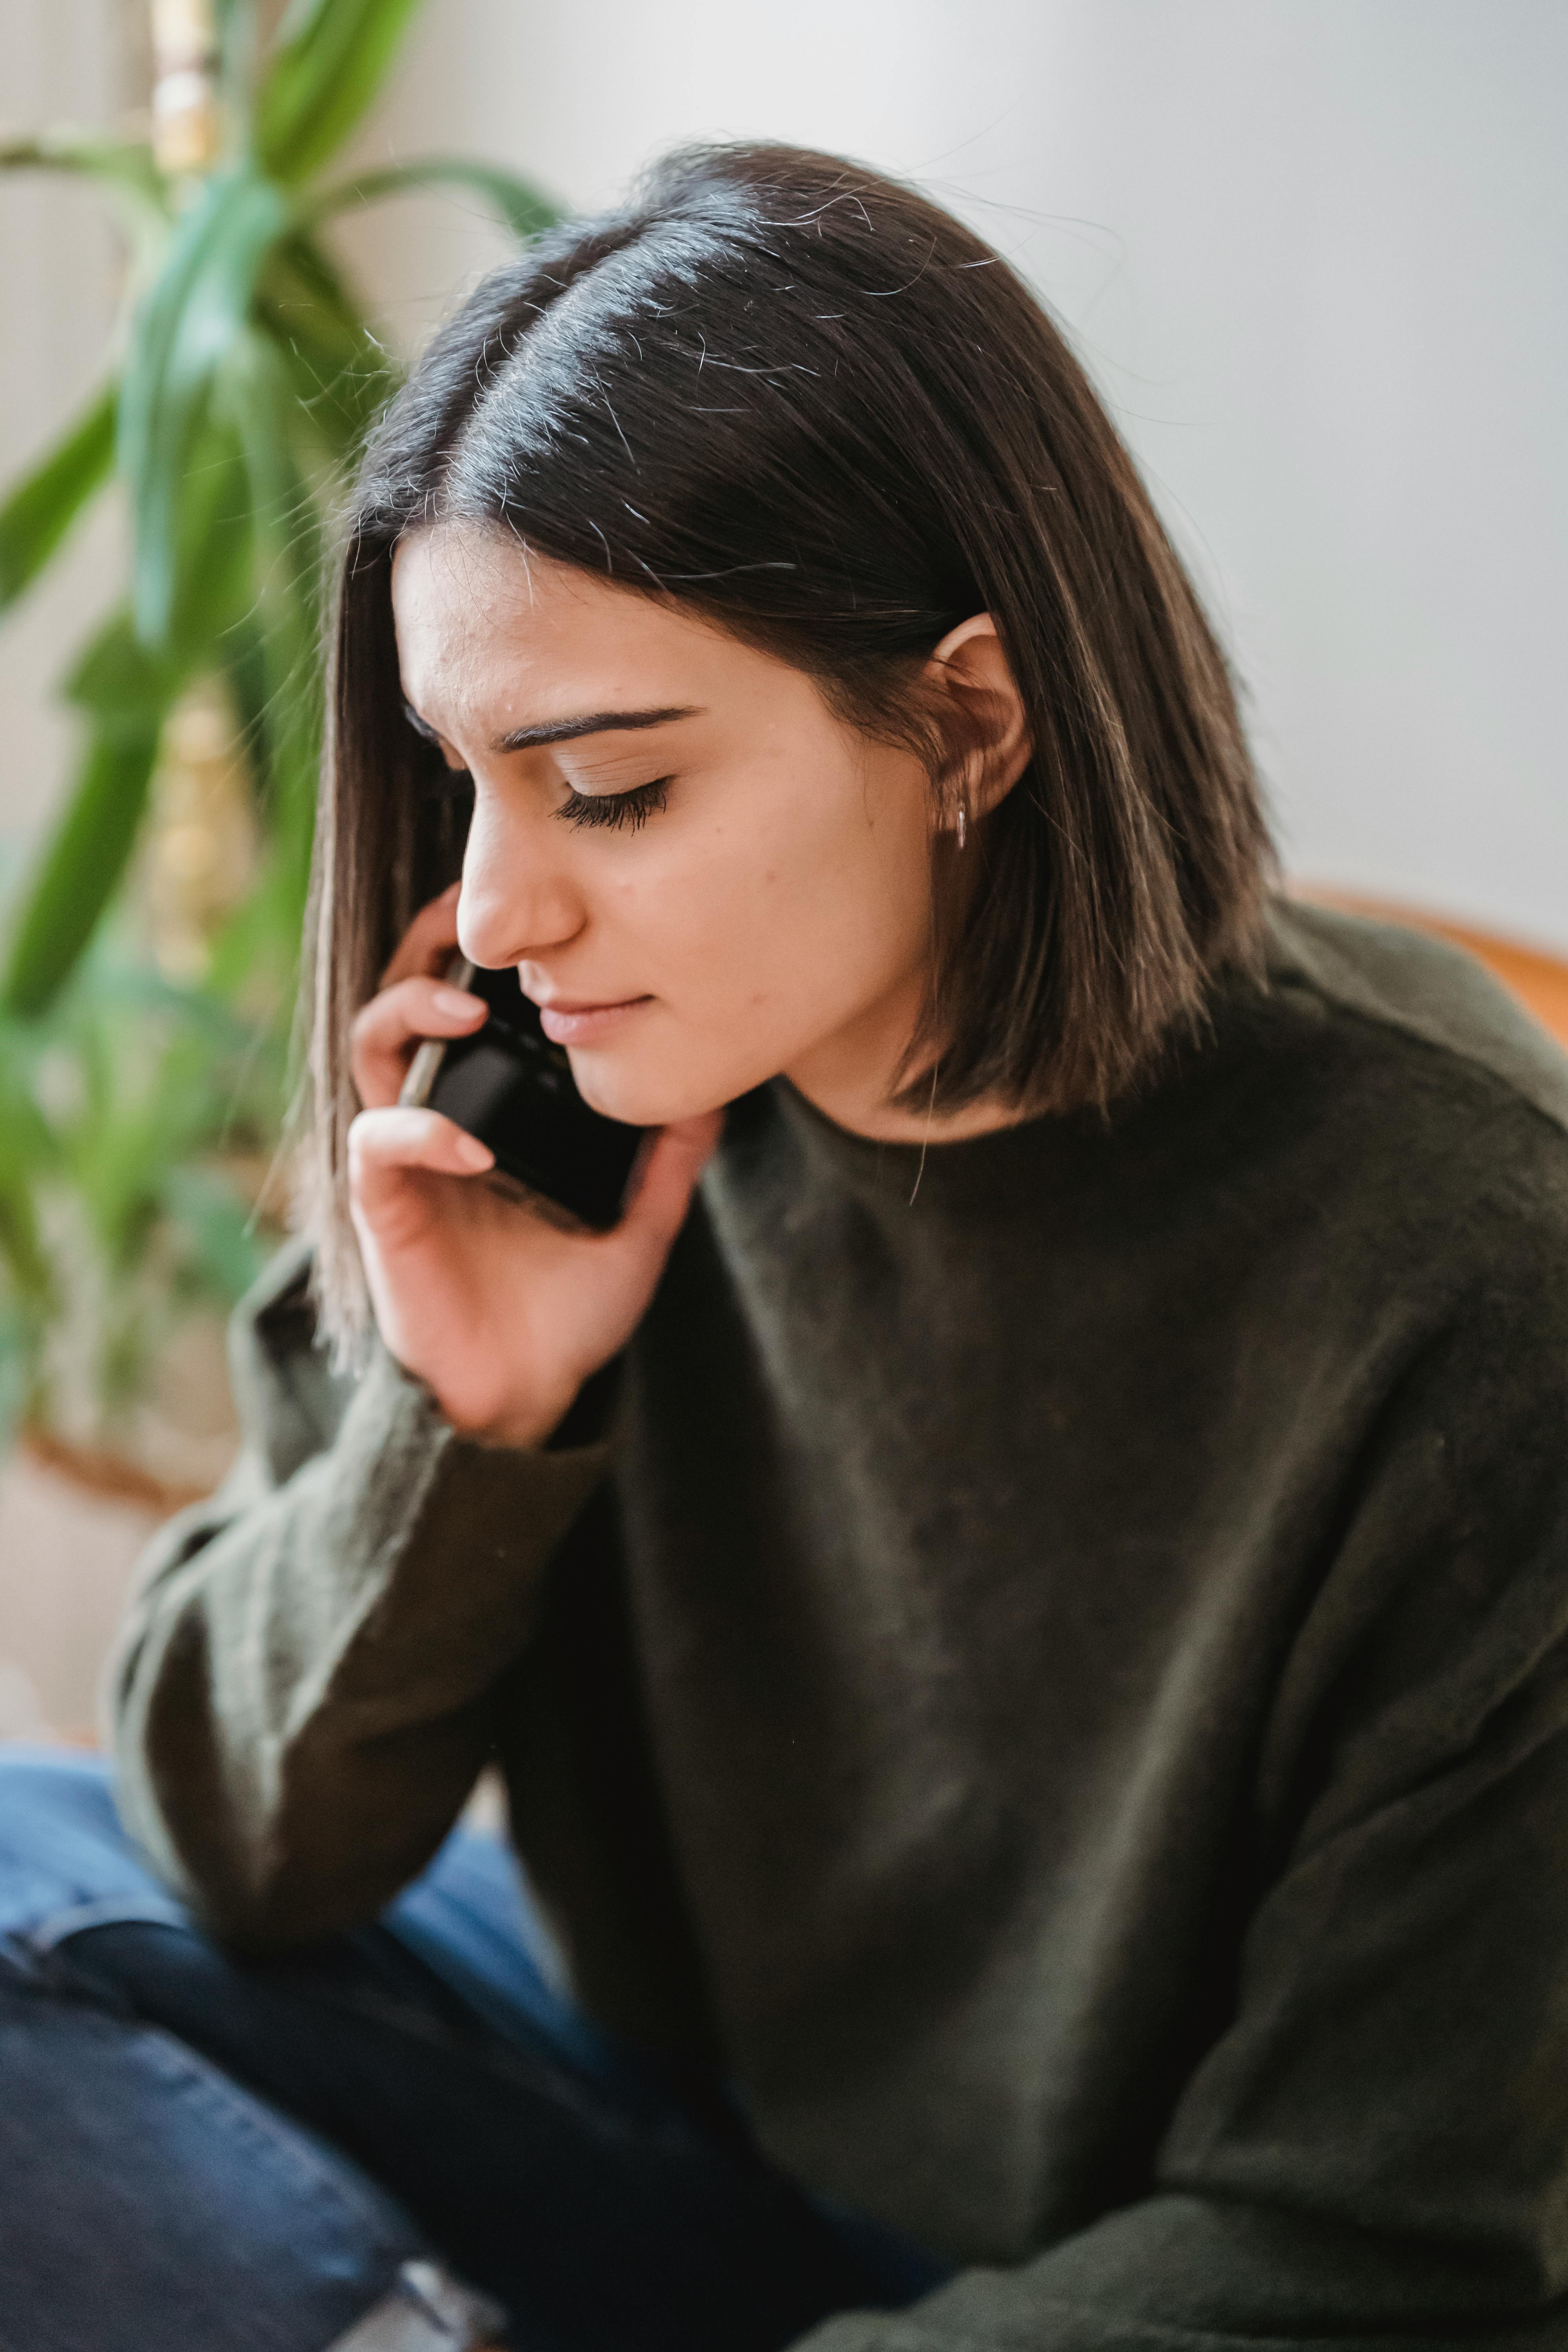 A woman on call at home | Source: Pexels